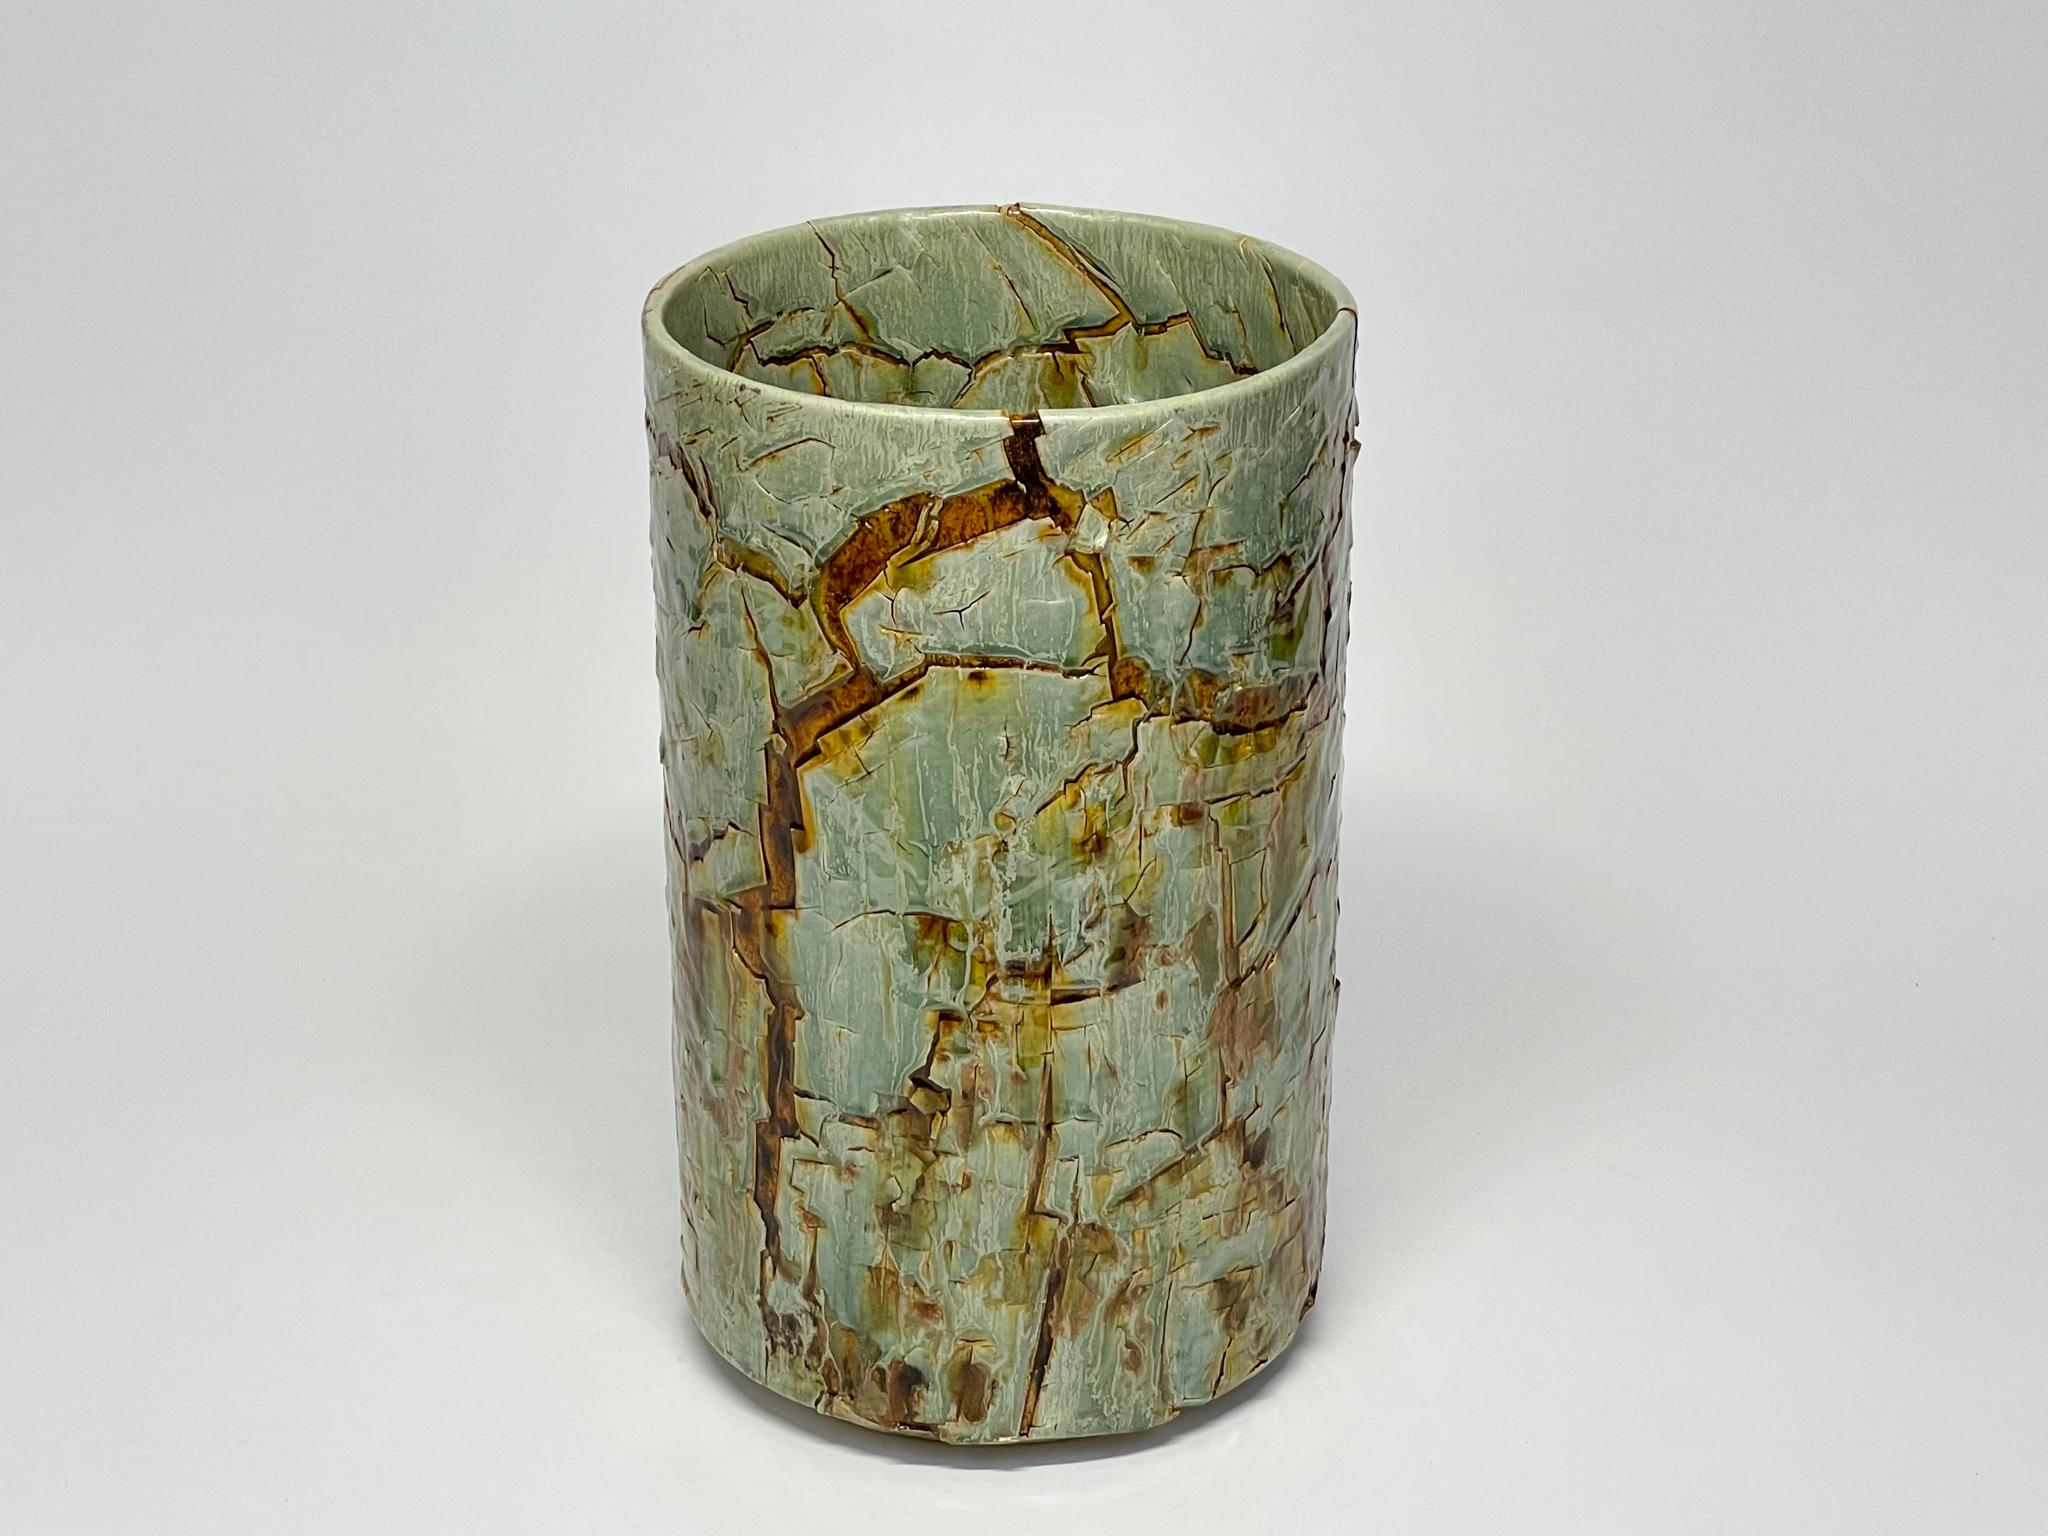 Glazed ceramic cylindrical sculpture by William Edwards
Hand built earthenware decorative vessel, fired multiple times to achieve a textured surface of random abstraction, in hues of celadon green with amber gloss glaze breaking through. and